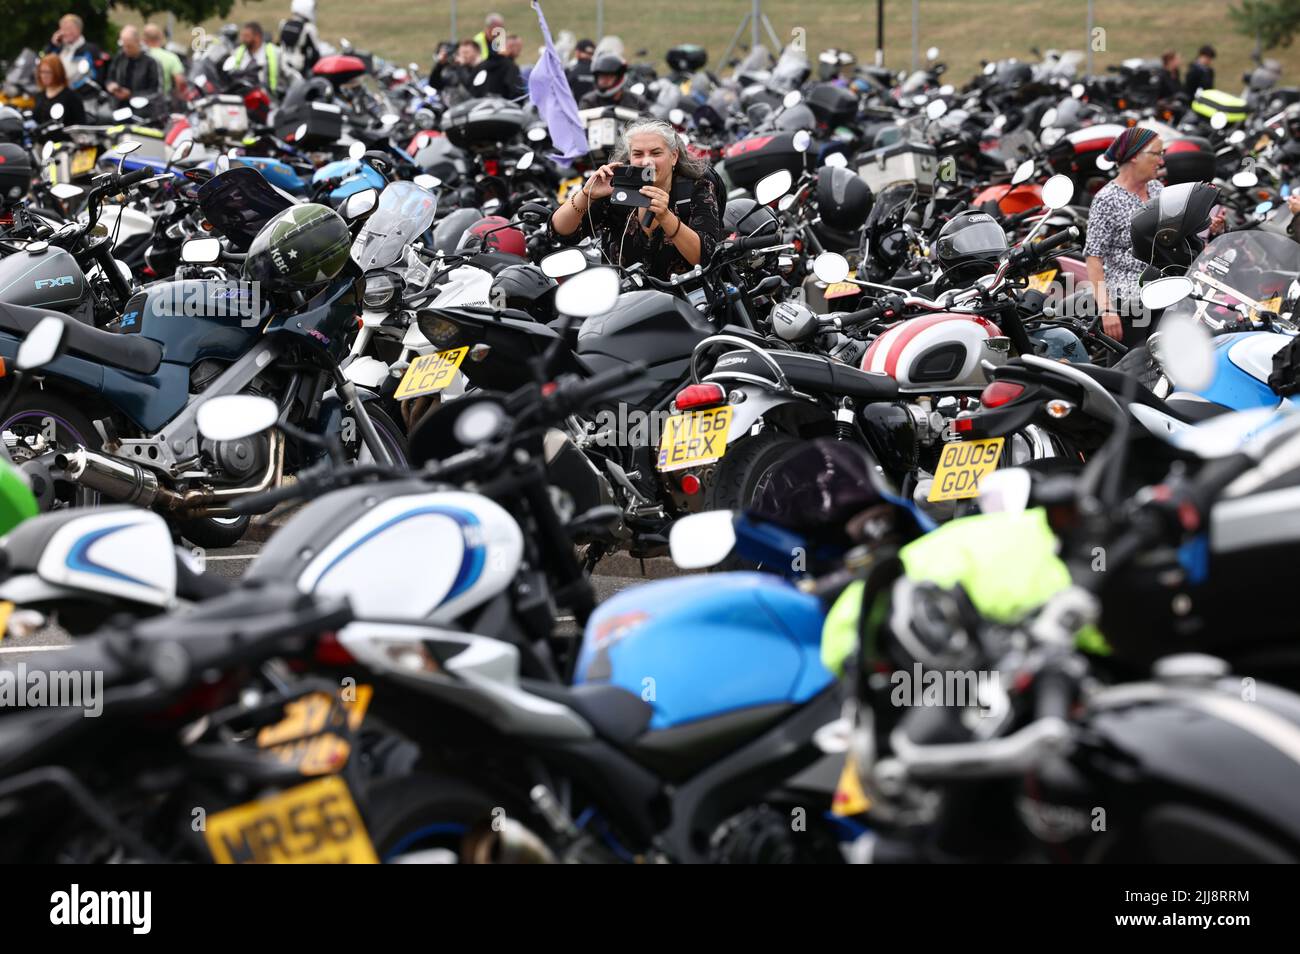 Hinckley, Leicestershire, UK. 24th July 2022. A woman photographs motorcycle during a World Record attempt for the largest Female biker meet at the global headquarters for Triumph Motorcycles. Credit Darren Staples/Alamy Live News. Stock Photo